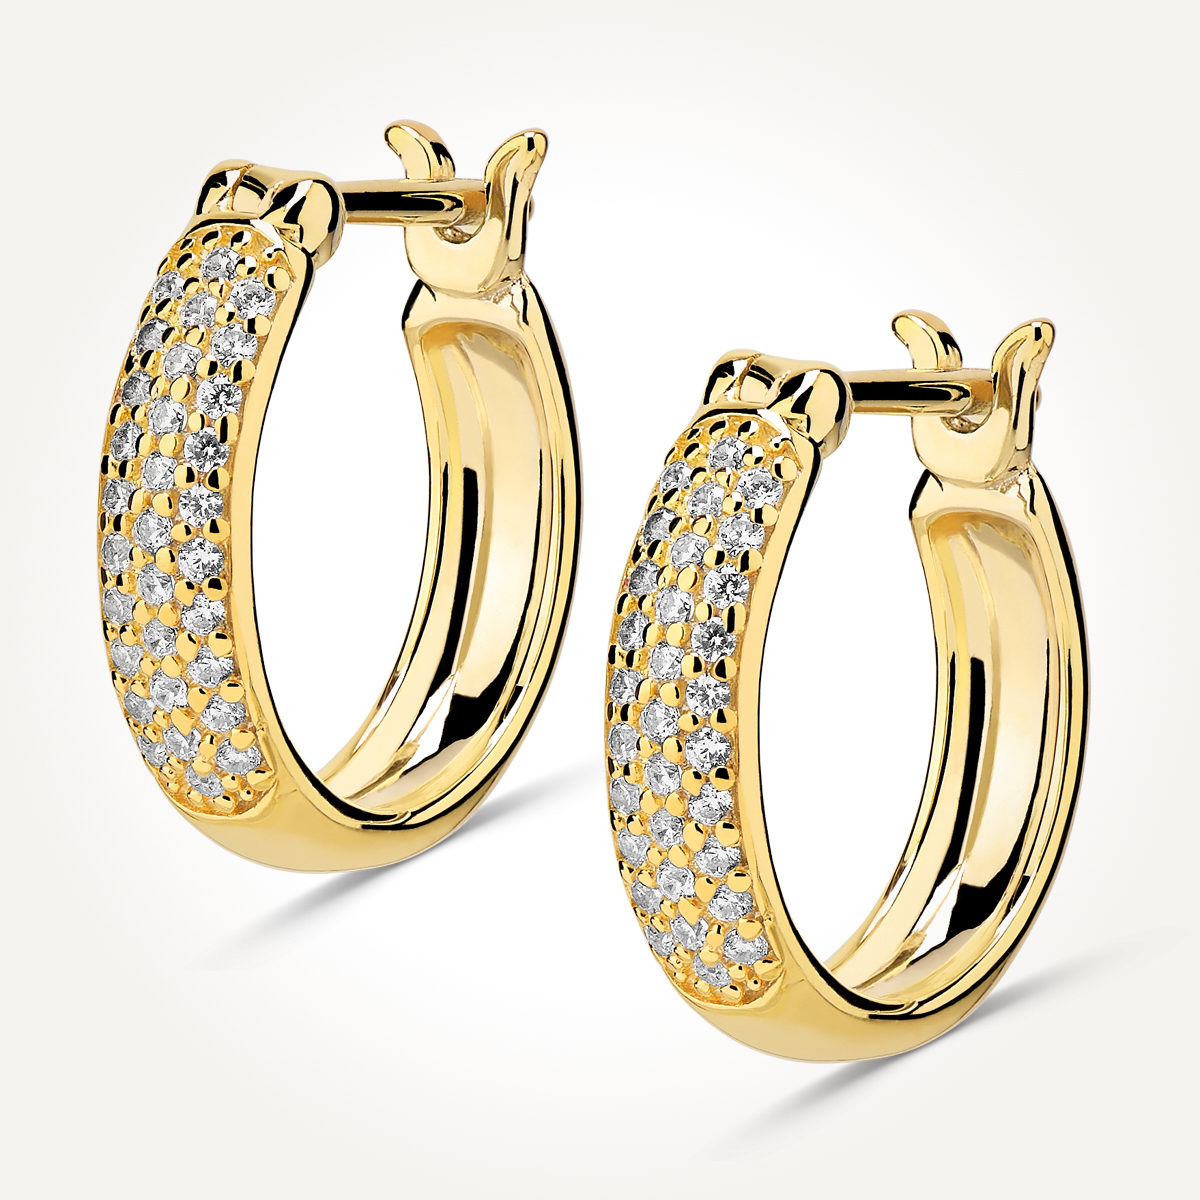 14KT Yellow Gold Pave Hoop Earrings 0.19 CT. T.W.